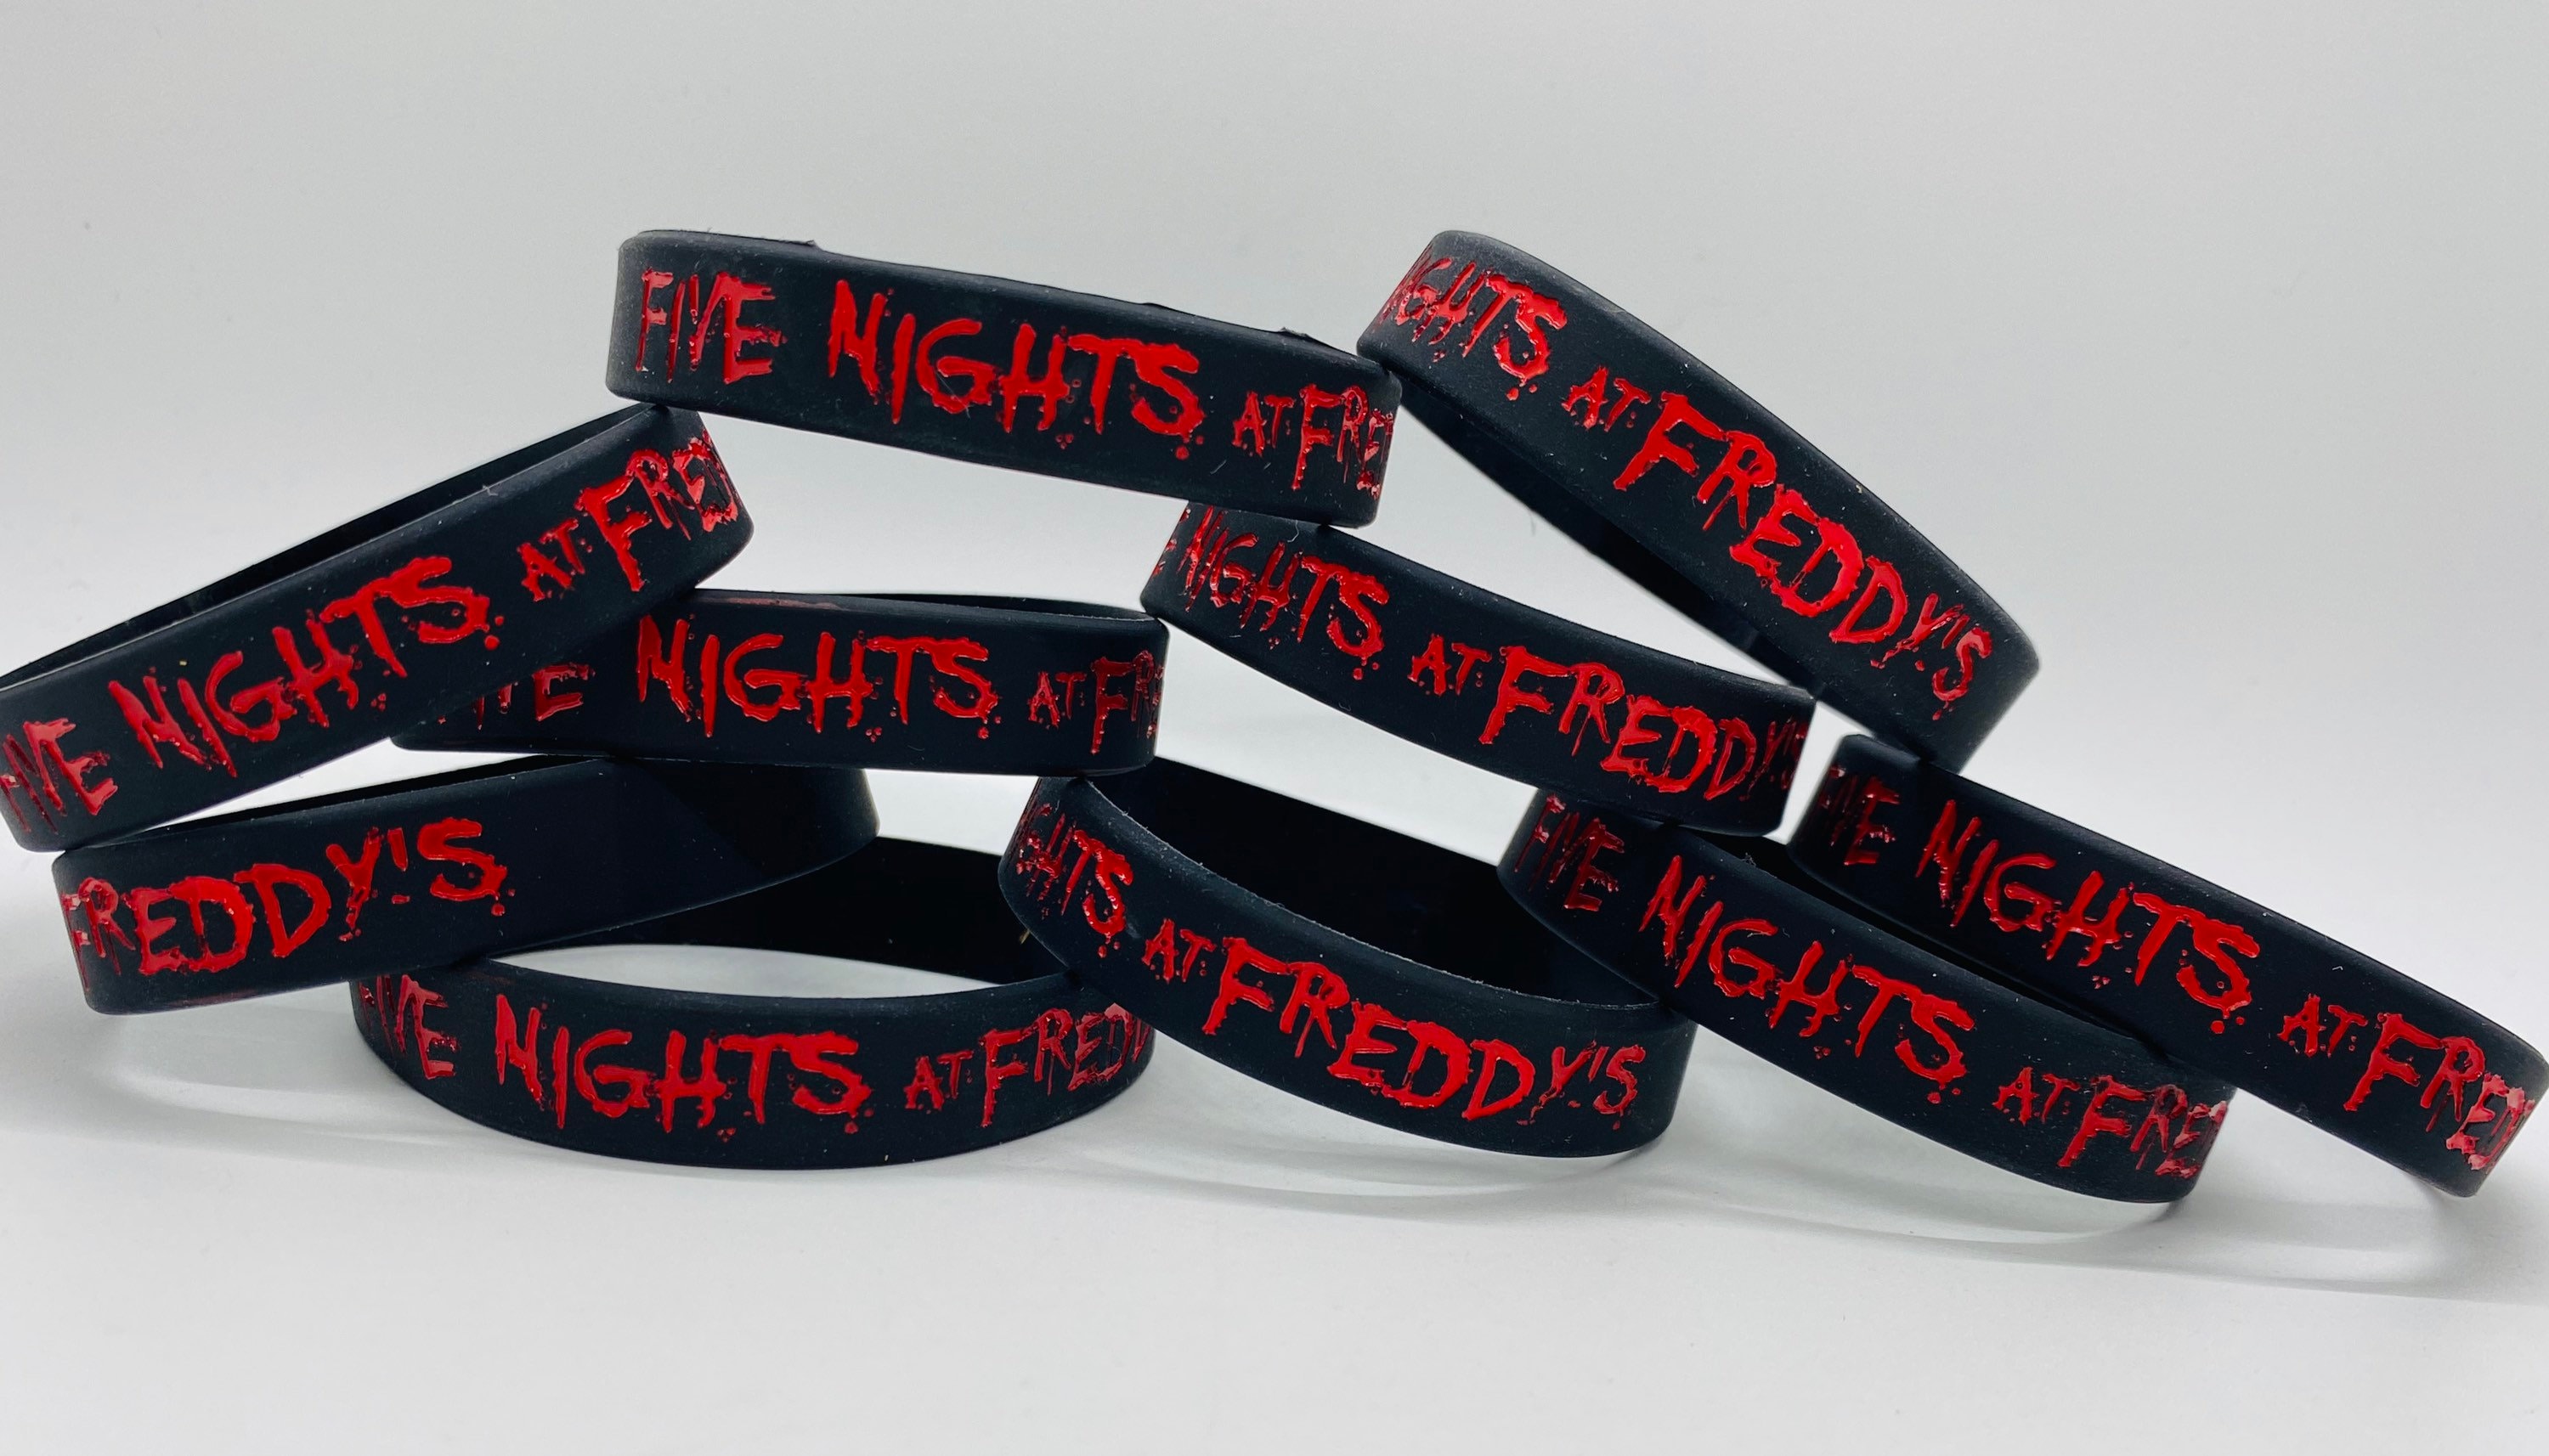 Five Nights at Freddys 20oz Water Bottle Birthday Party WRISTBANDS